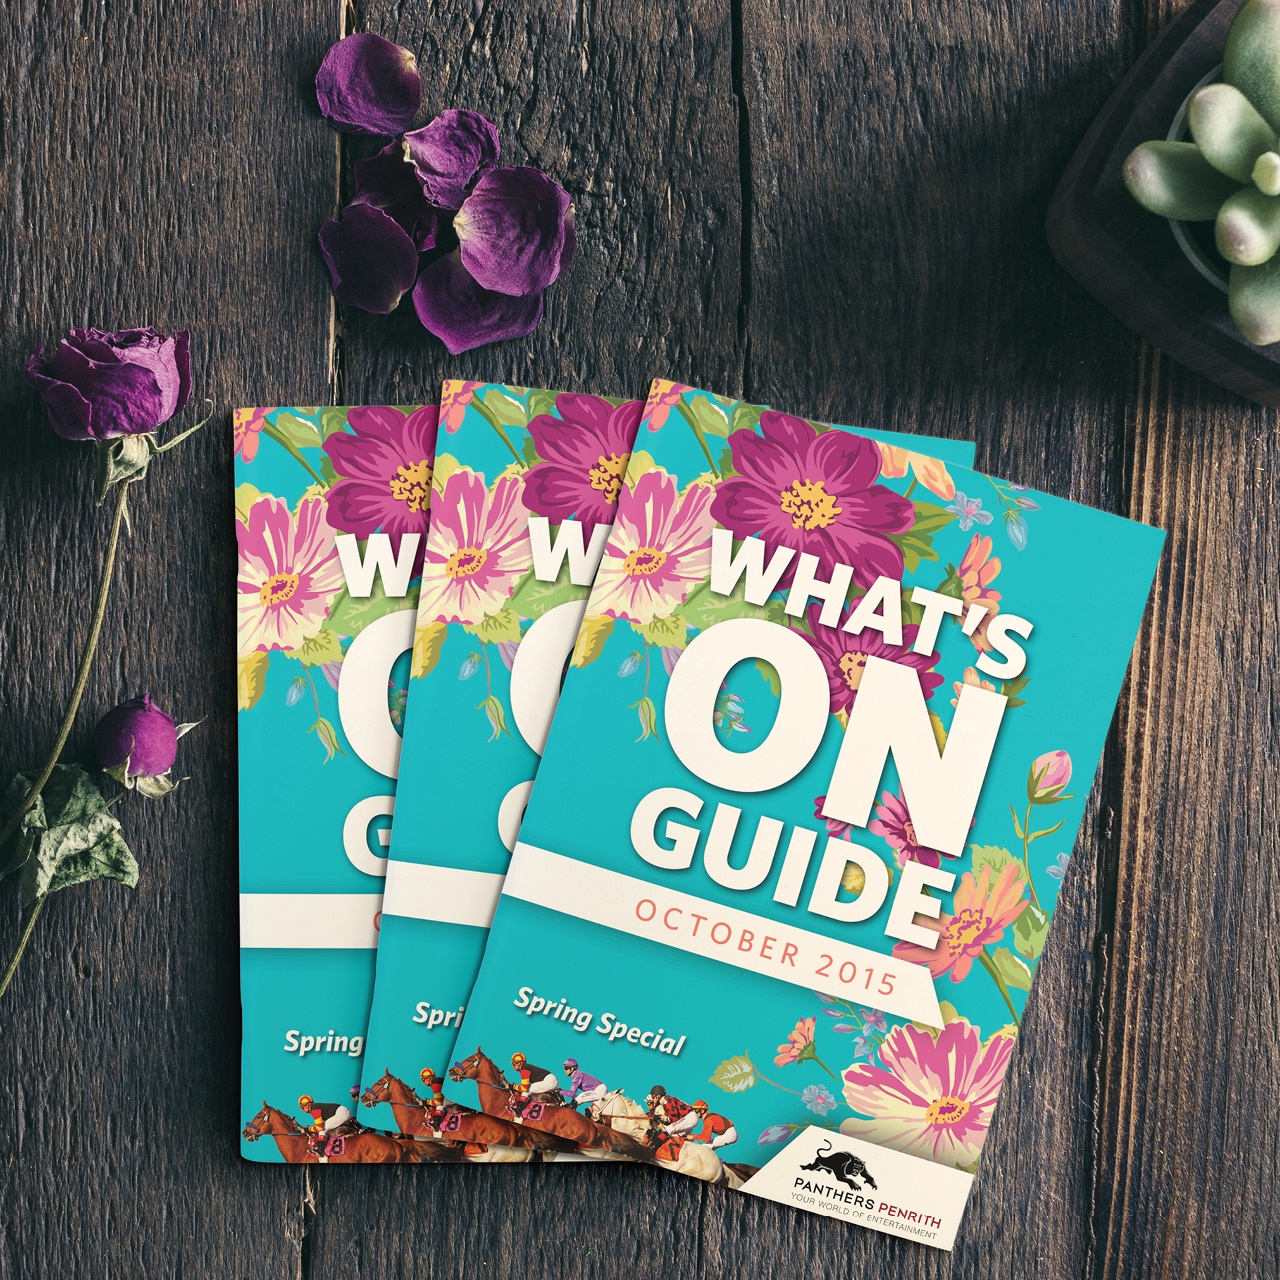 Panthers What's On Guide October 2015